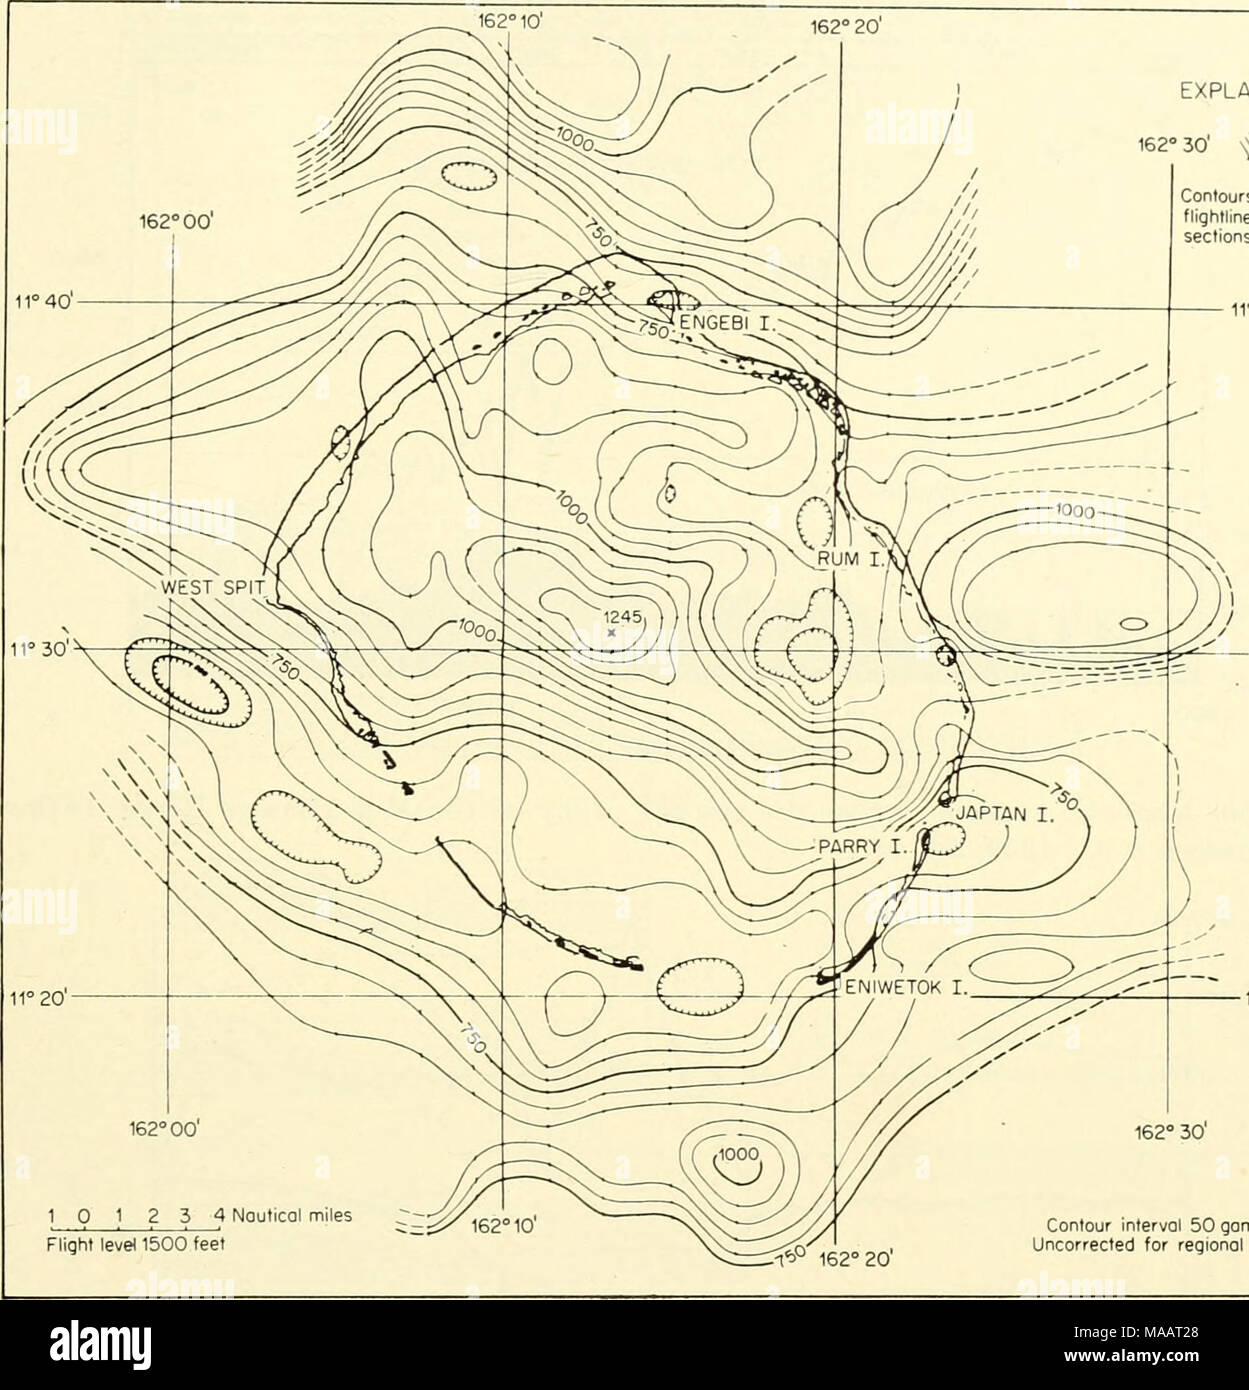 . The Earth beneath the sea : History . Contours showing flighliine inter- sections 11° 40' 11° 30' 11° 20 162° 20 Contour interval 50 gommos Uncorrected for regionol grodient Fig. 25. Magnetic map of Eniwetok. (After Keller et ah, 1954, fig. 7.) Keller et al. (1954) conclude that the anomalies observed across the Aleutian Trench are produced by susceptibility contrasts within the rocks of the sea floor and bear no direct relation to the trench. However, they could also arise from variations in the depth of the basement rocks under the sea floor. In the absence of information from other source Stock Photo